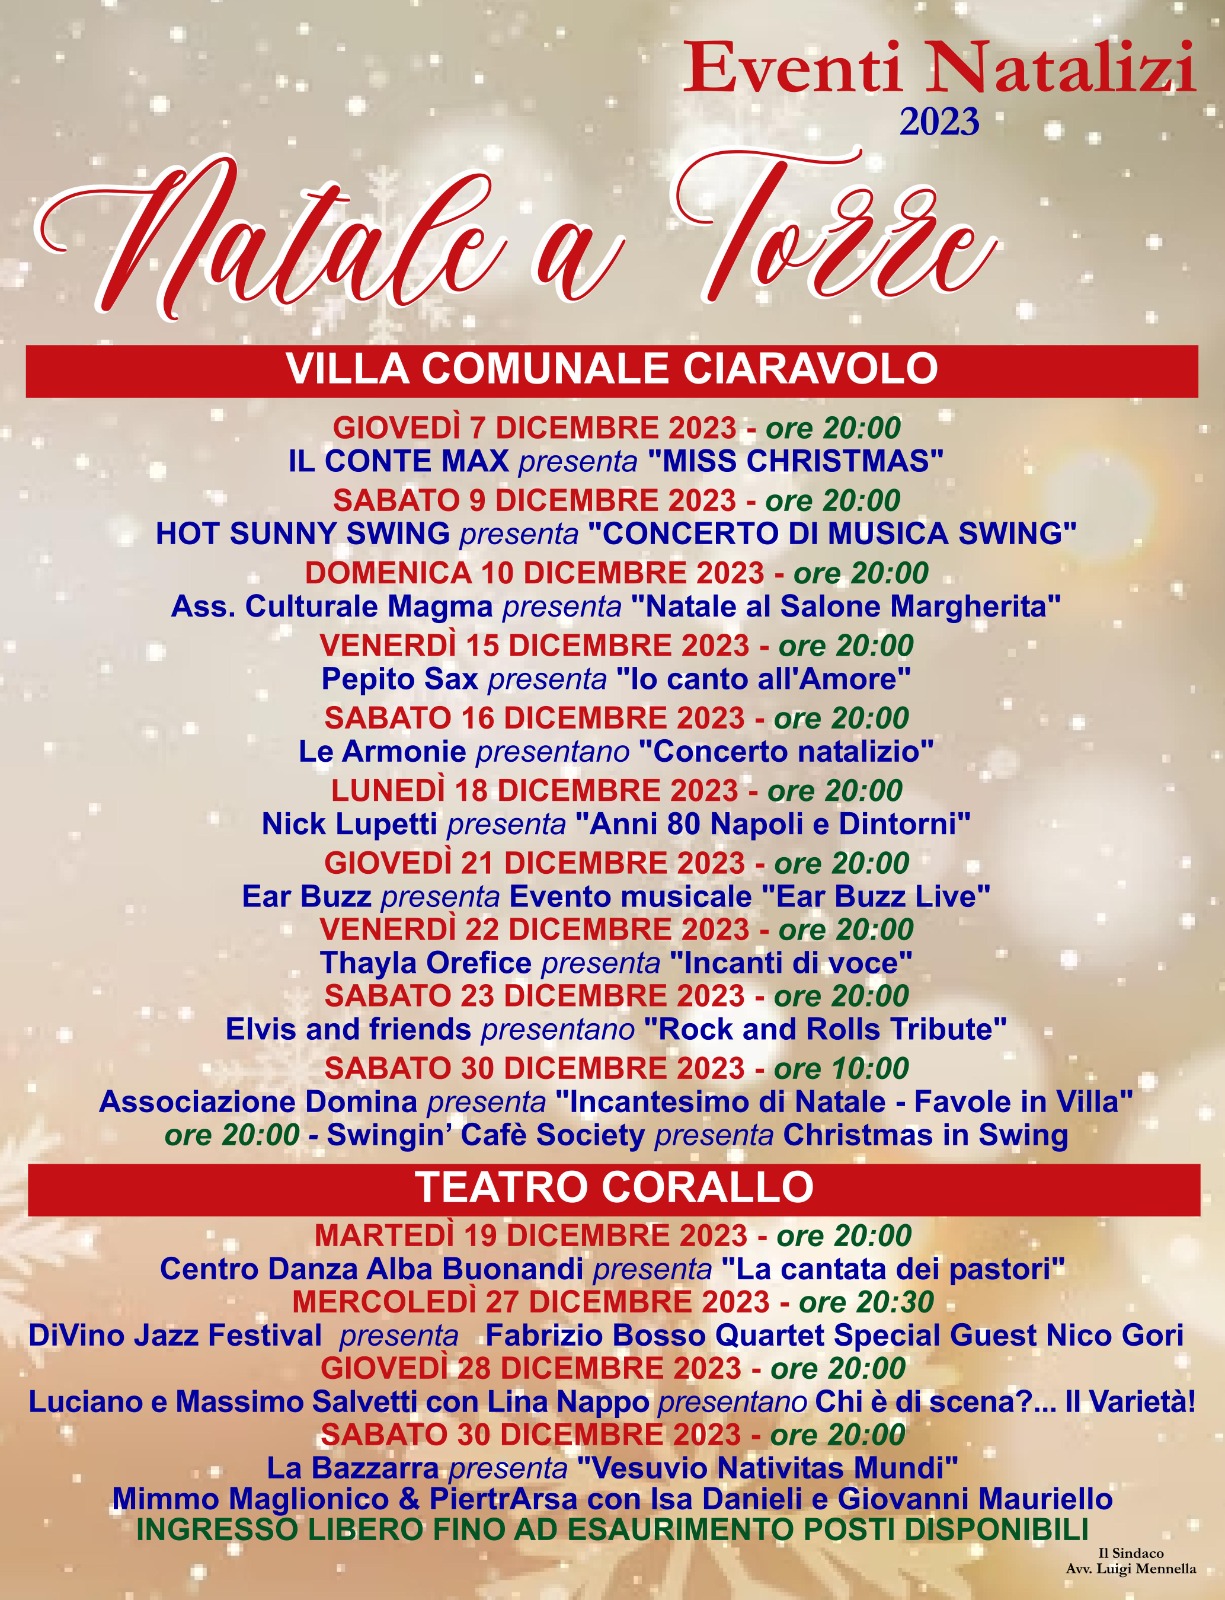 Natale a torre